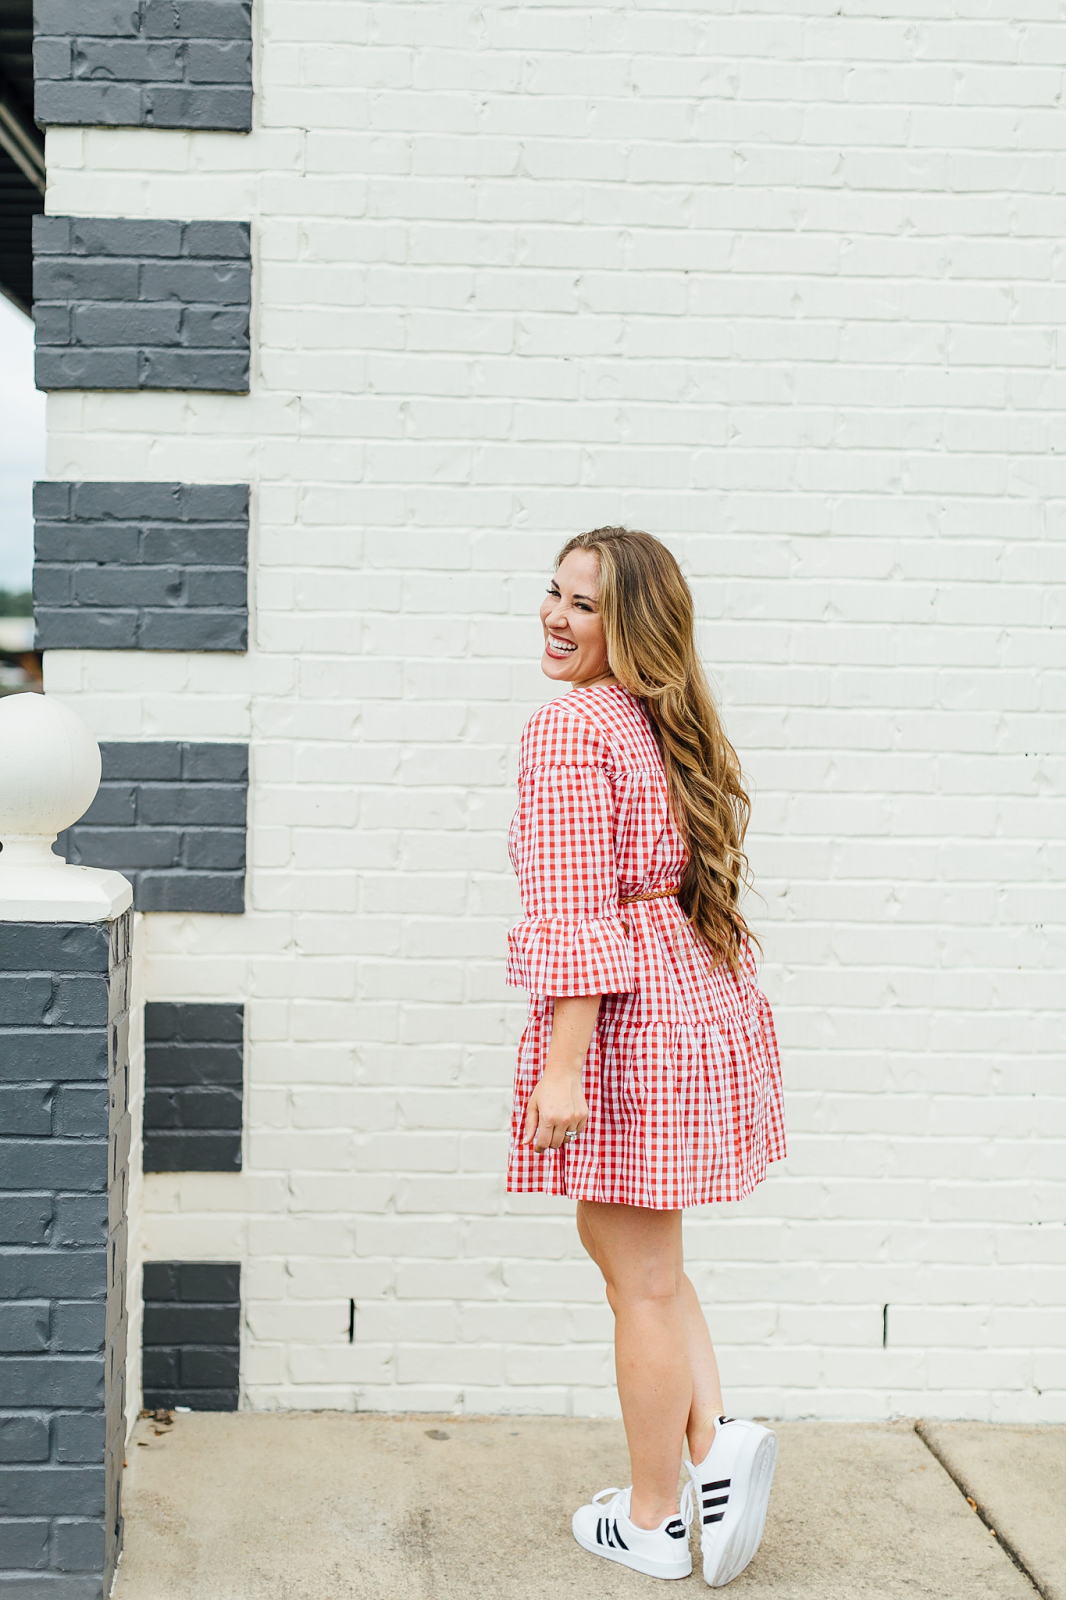 Trend Spin Linkup - Red White and Blue Outfits for Labor Day by fashion blogger Walking in Memphis in High Heels